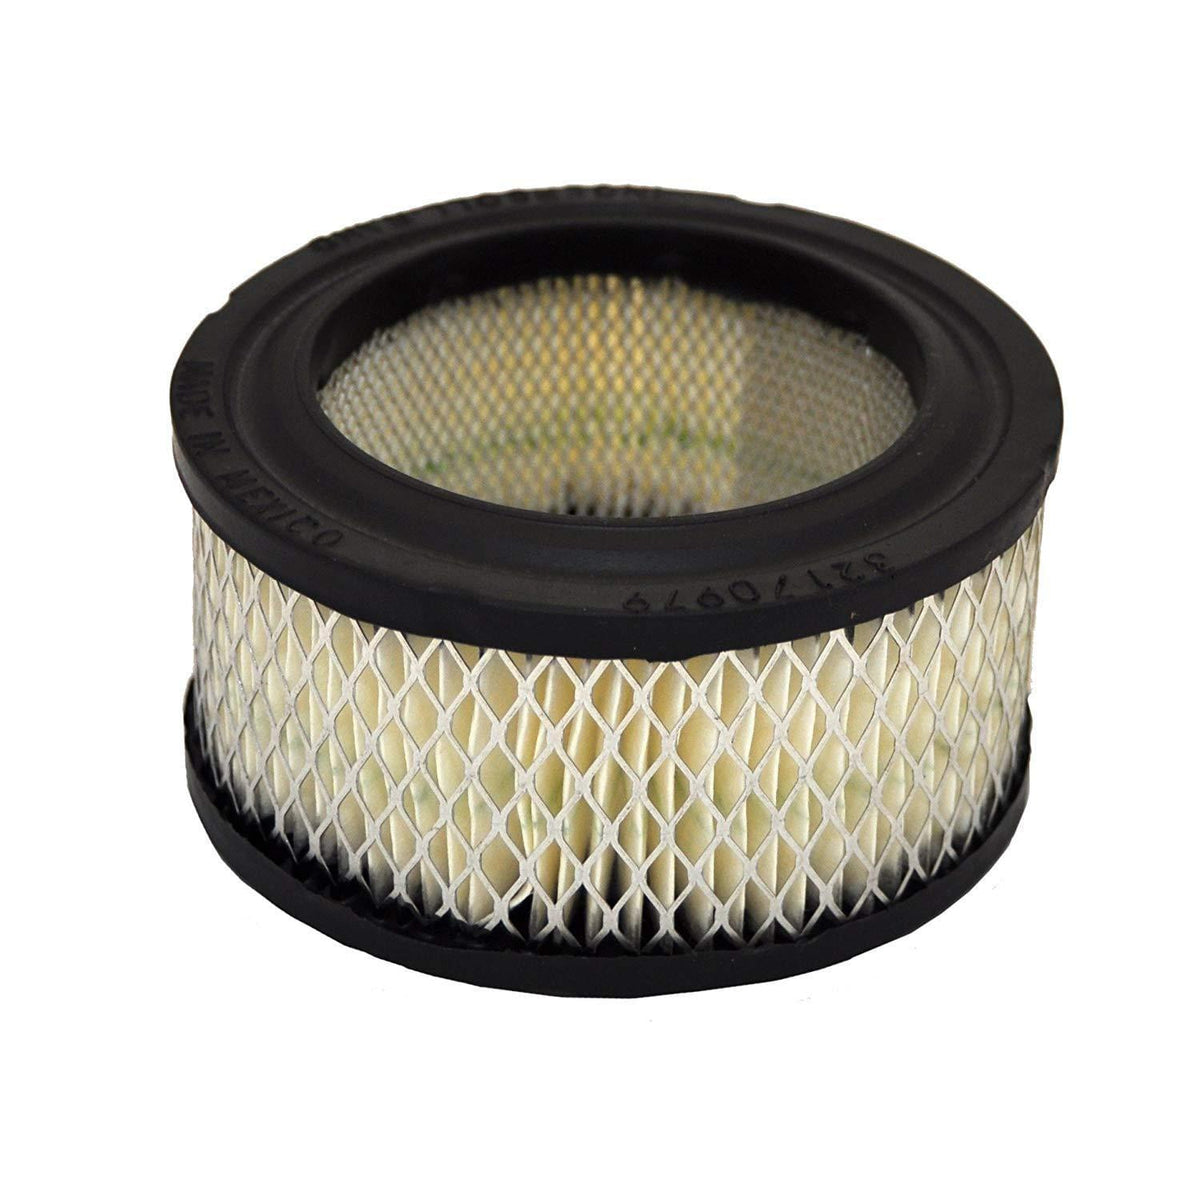 Ingersoll Rand 32282196 Intake Air Filter Element are used for SS3, SS5, 2475 models. The Ingersoll Rand 32282196 Intake Air Filter Element is a replacement for many air compressor brands.